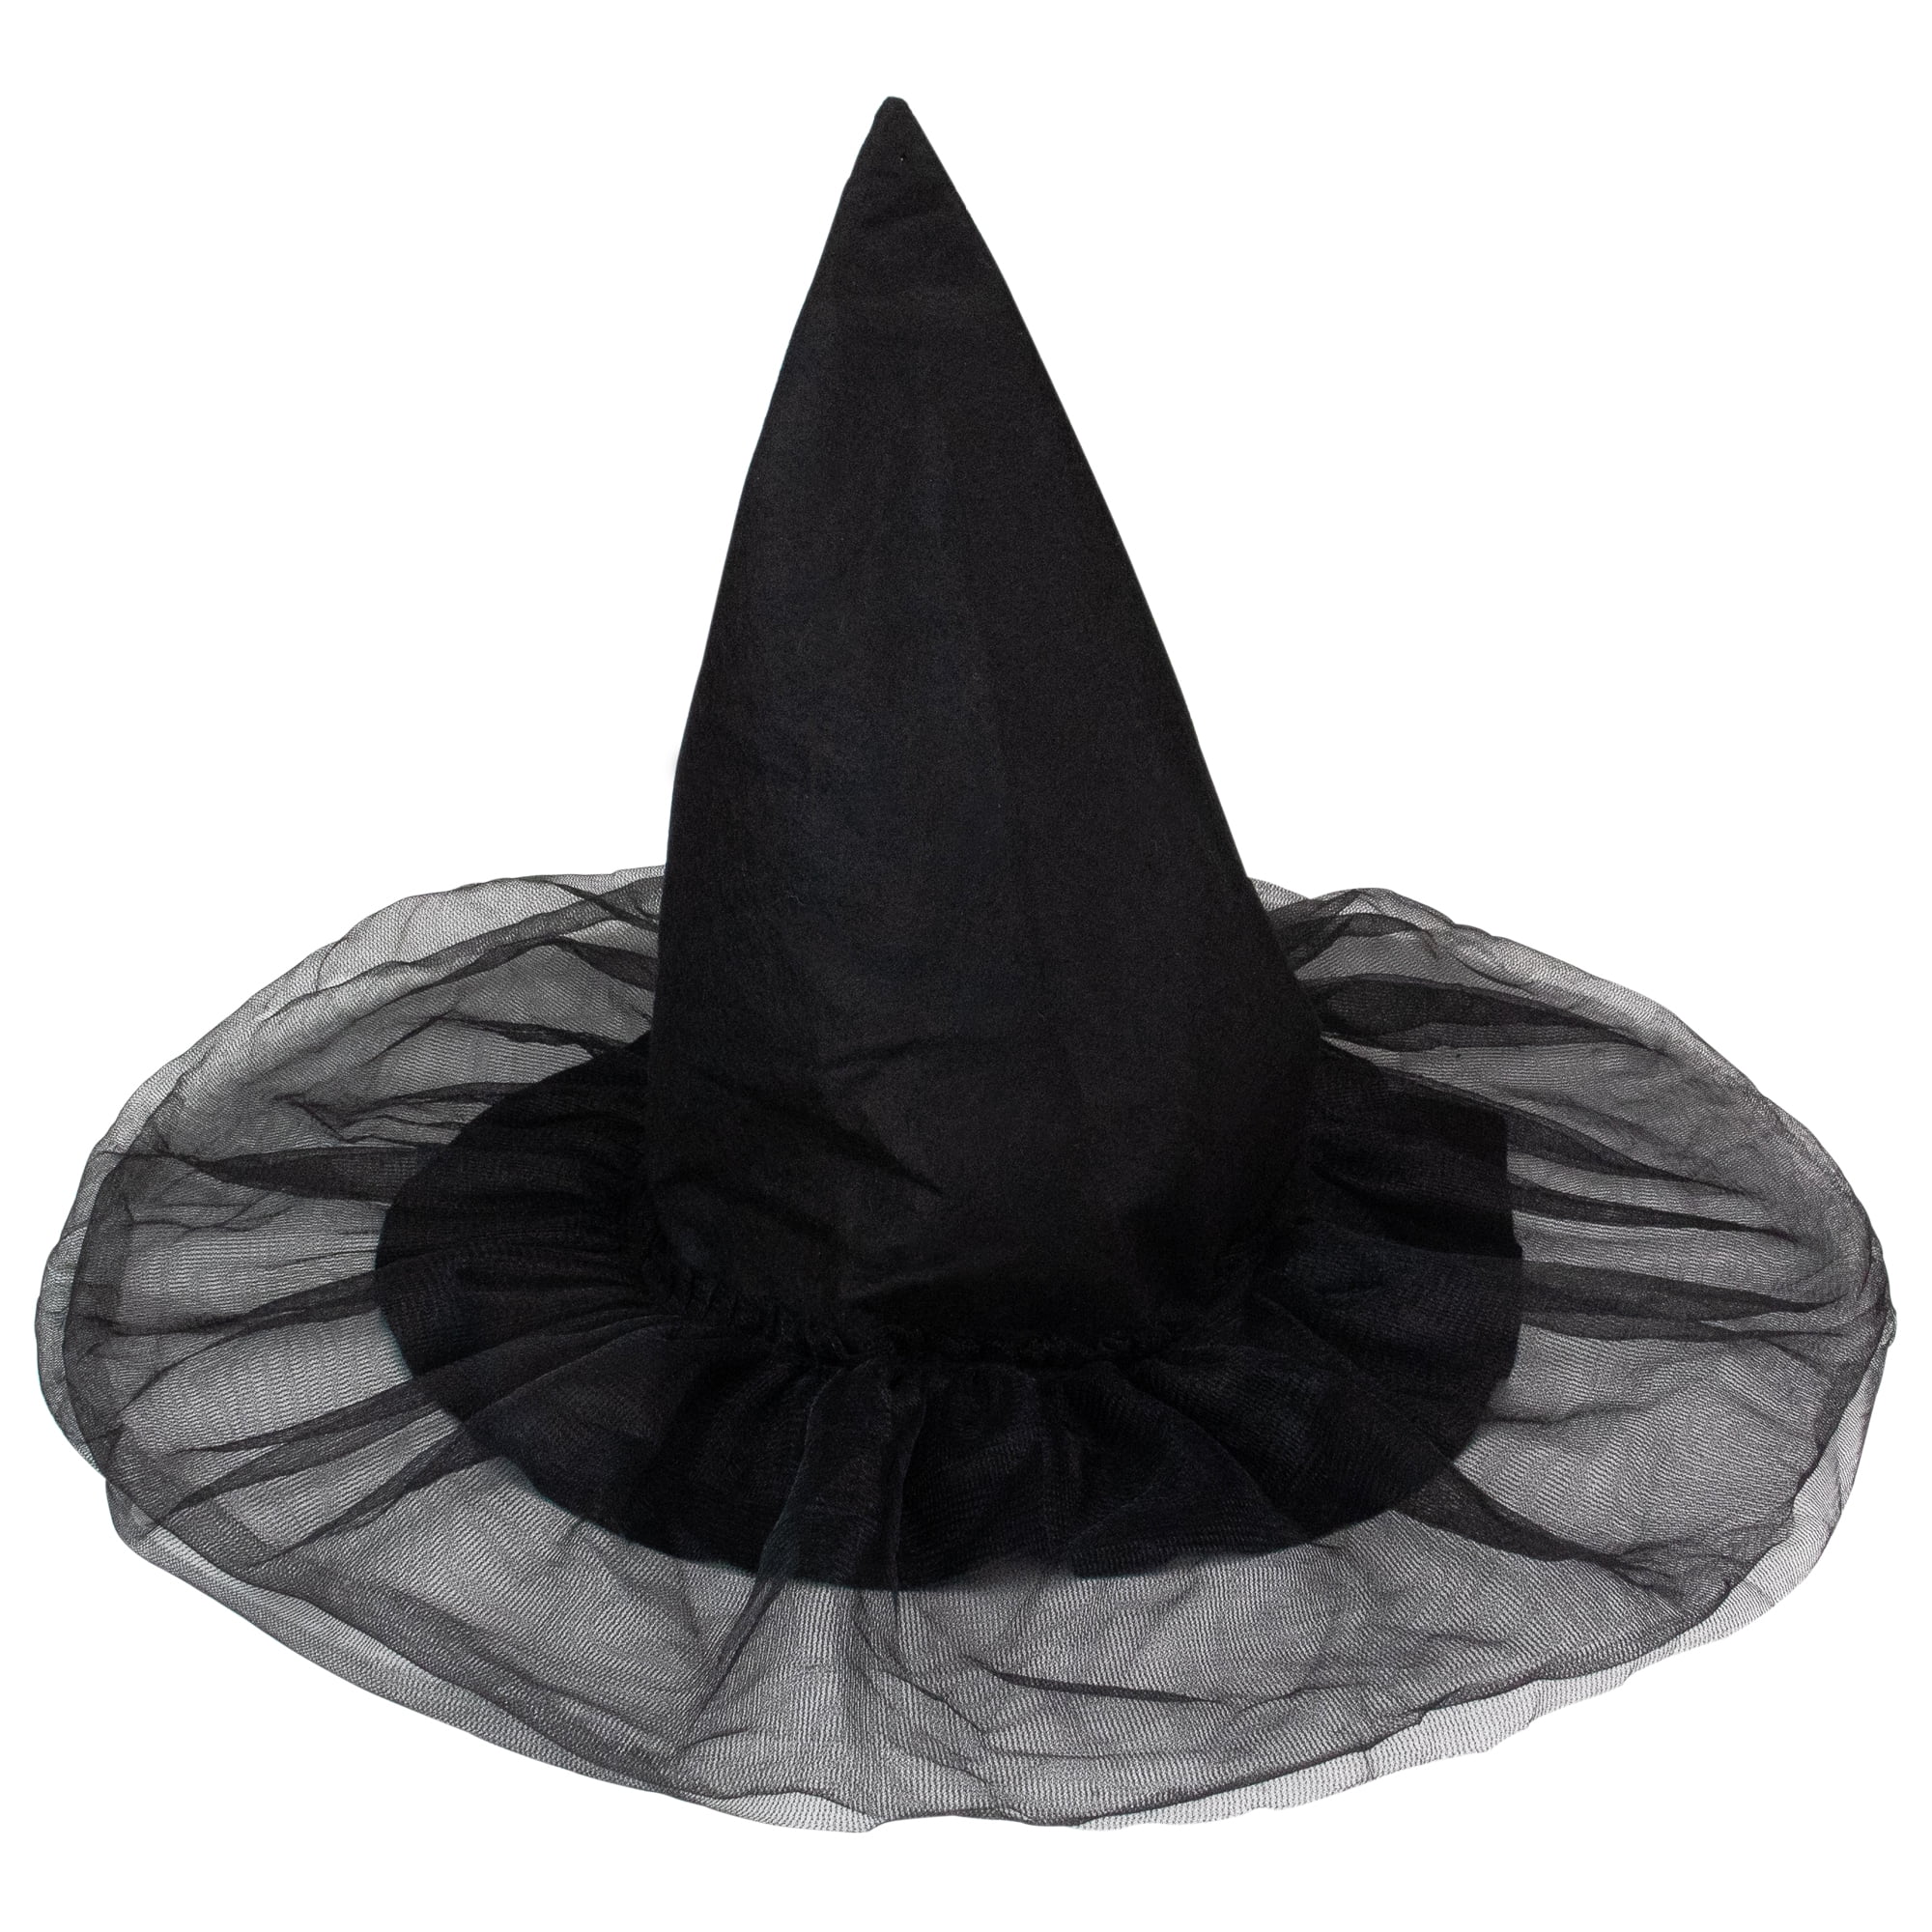 Satin Witch Hat Black Wicked Fancy Dress Up Halloween Adult Costume Accessory 